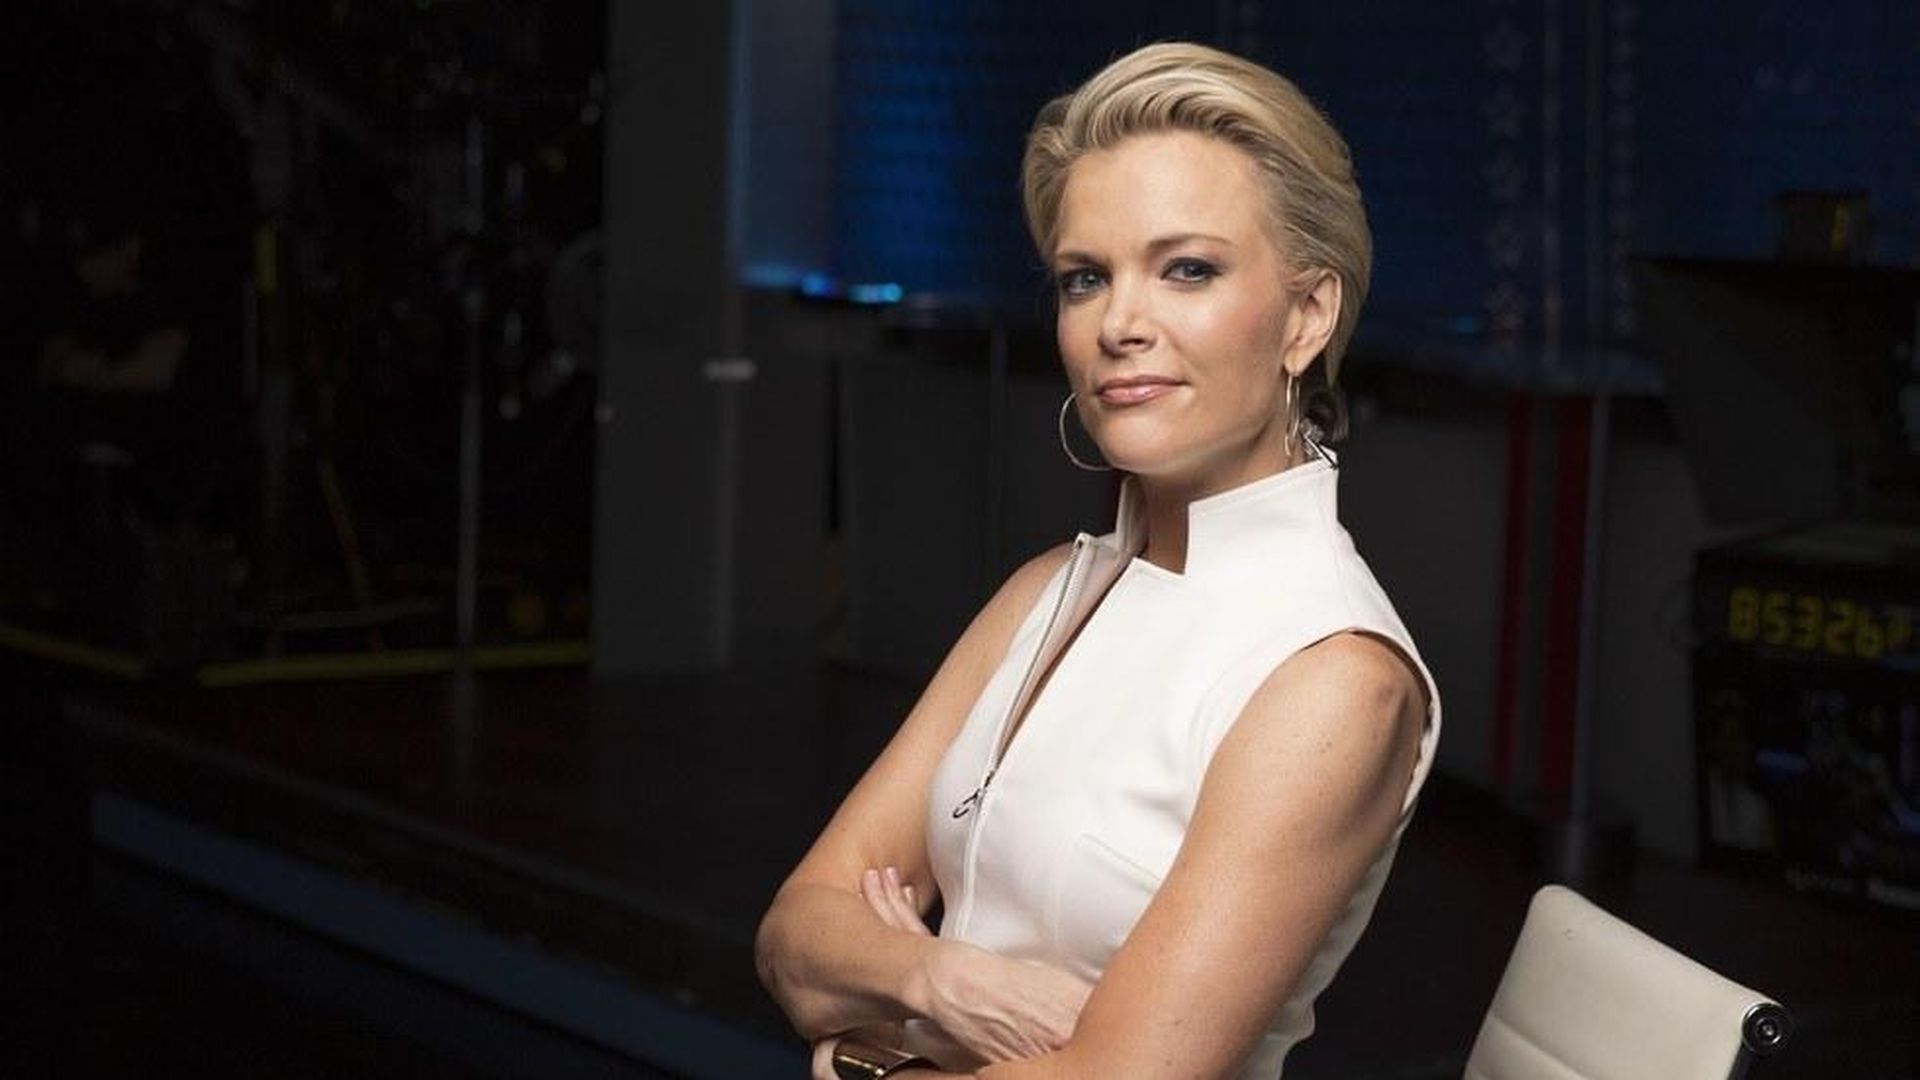 Megyn Kelly Gets Her Time Axios